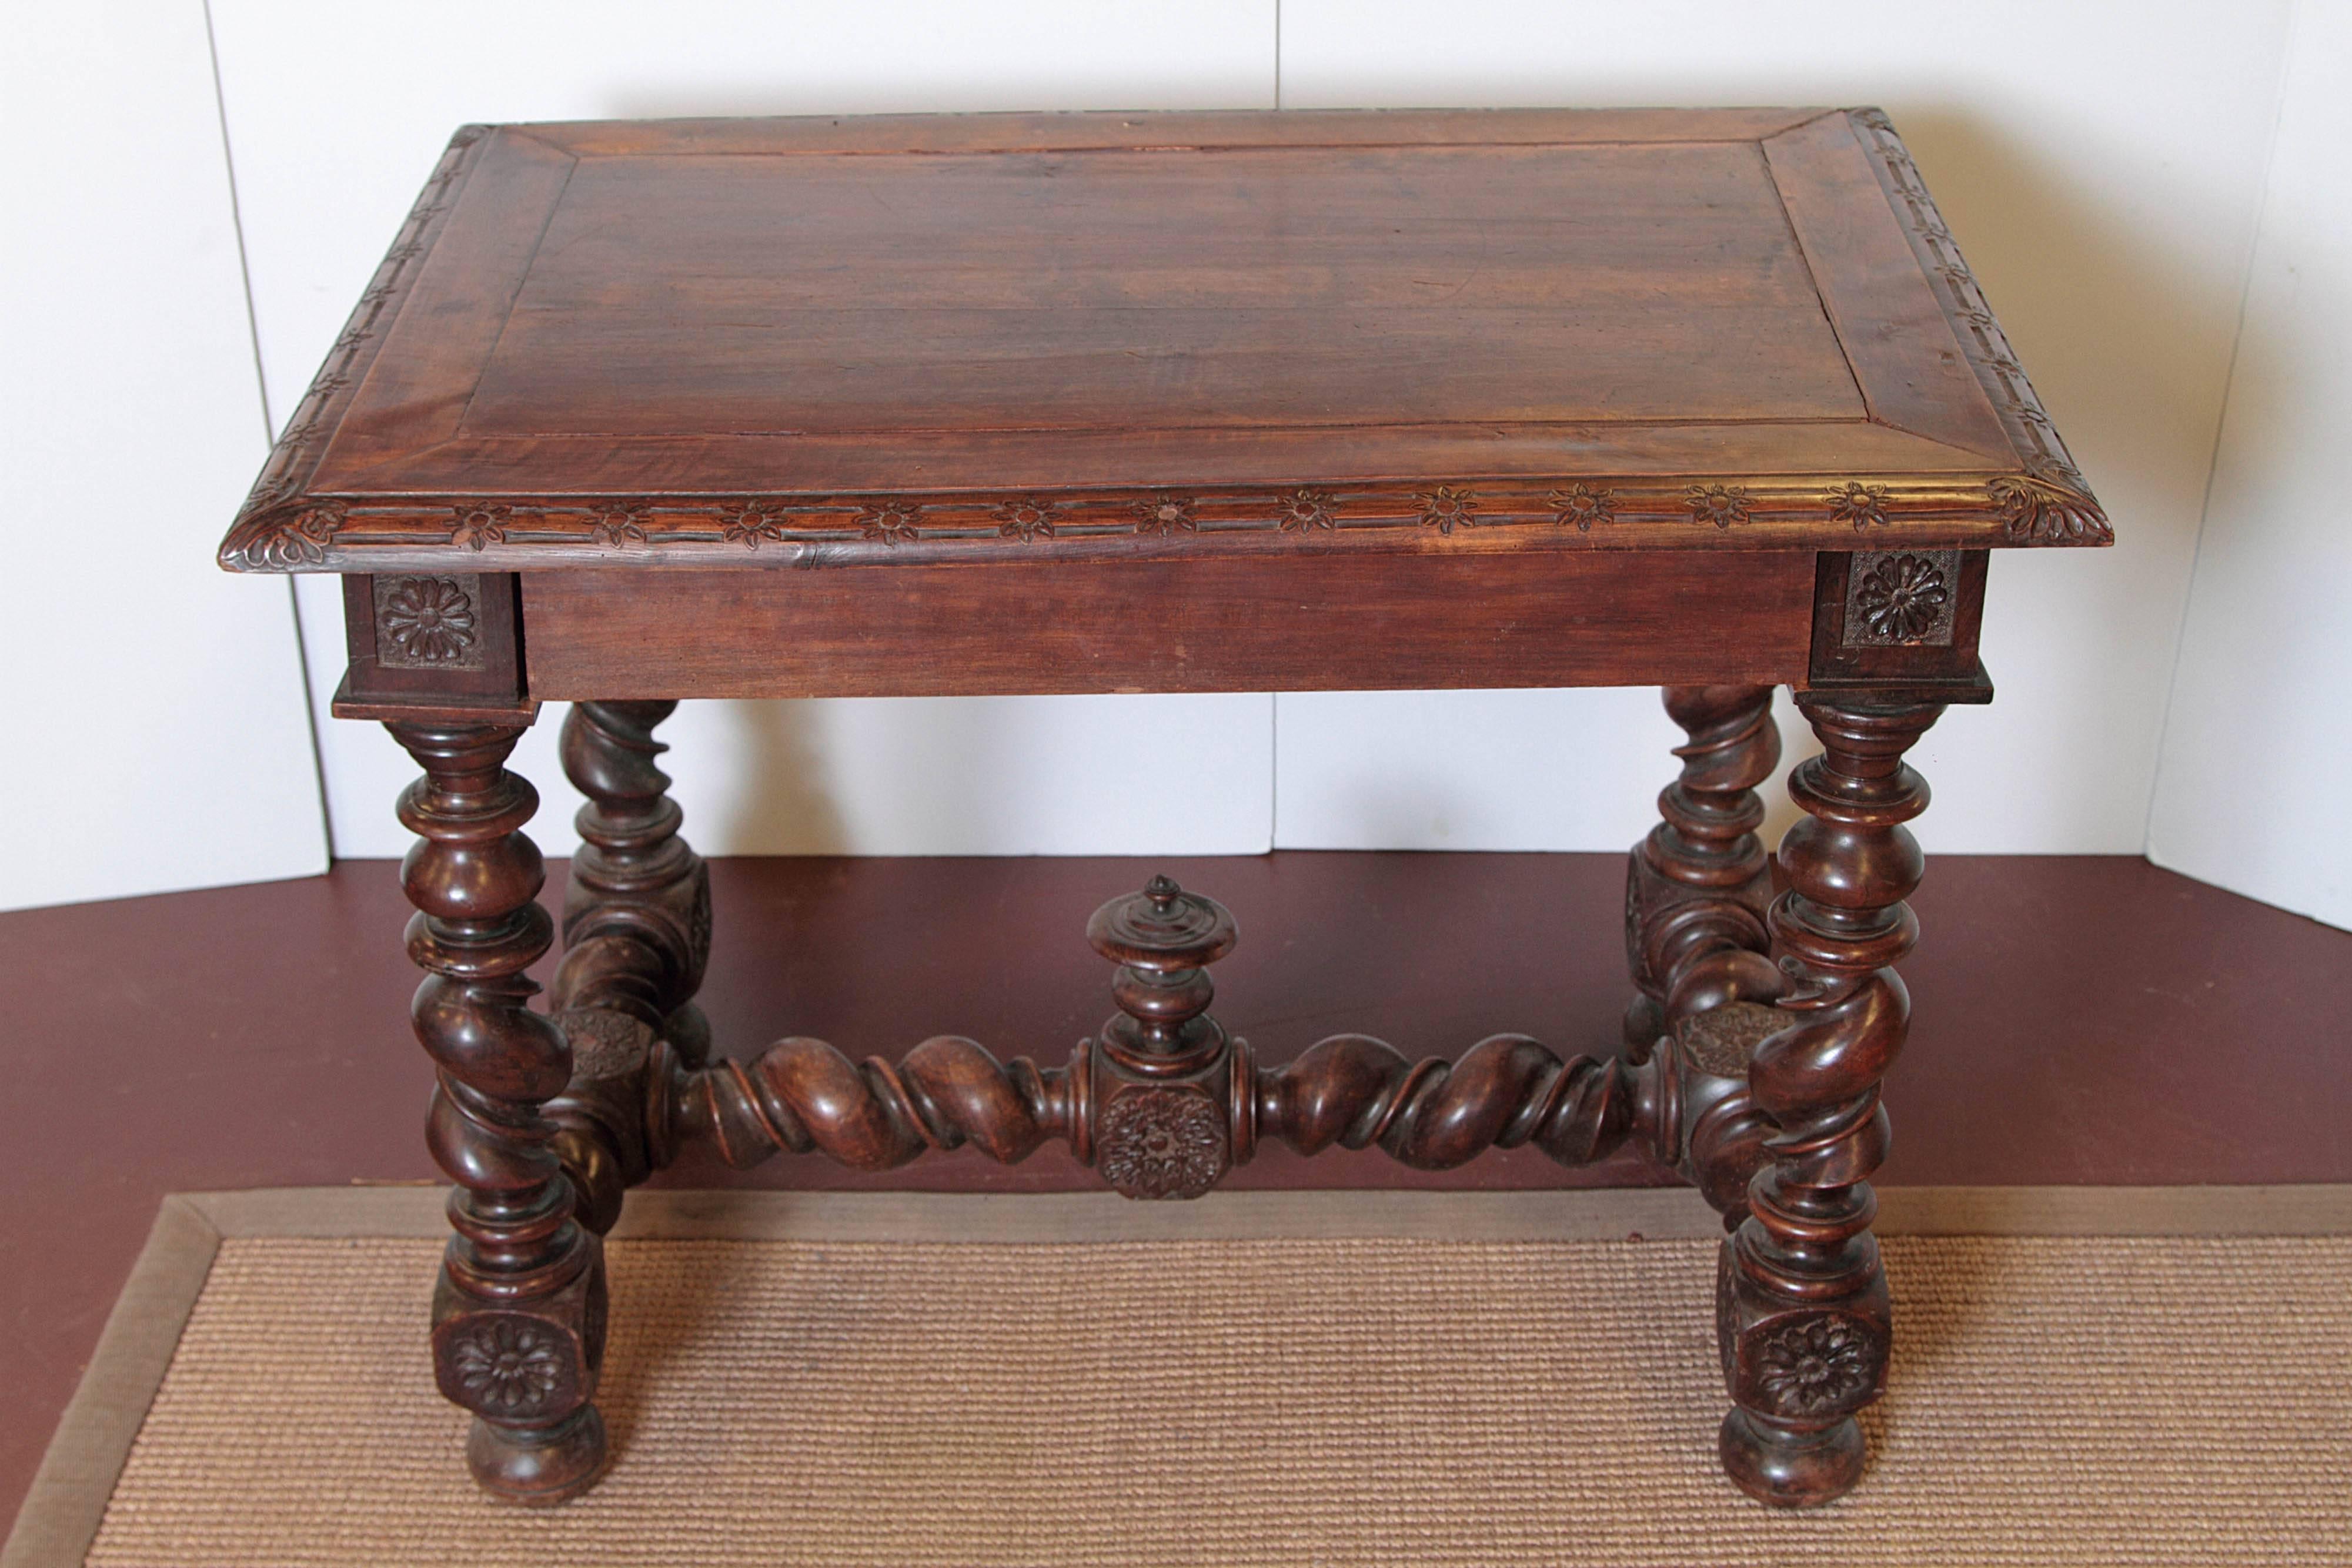 19th century, French walnut rectangular barley twist table with joined stretcher.